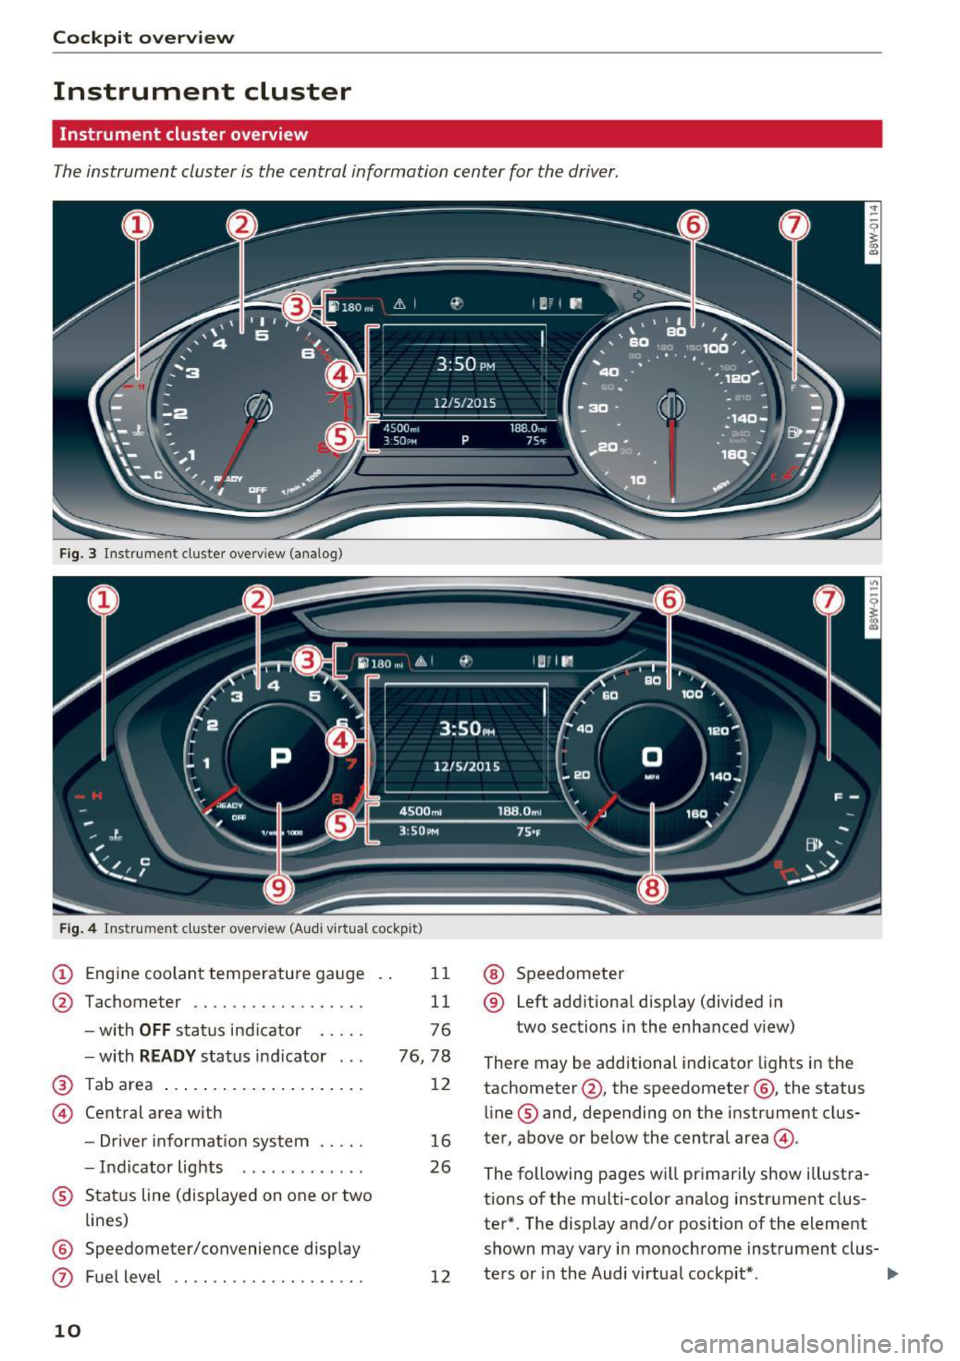 AUDI A4 2017 User Guide Cockpit  overview 
Instrument  cluster 
Instrument  cluster  overview 
The instrument  cluster  is the  central  information  center  for  the  driver. 
Fig. 3 Instrument  cl uster  overv iew (analog)